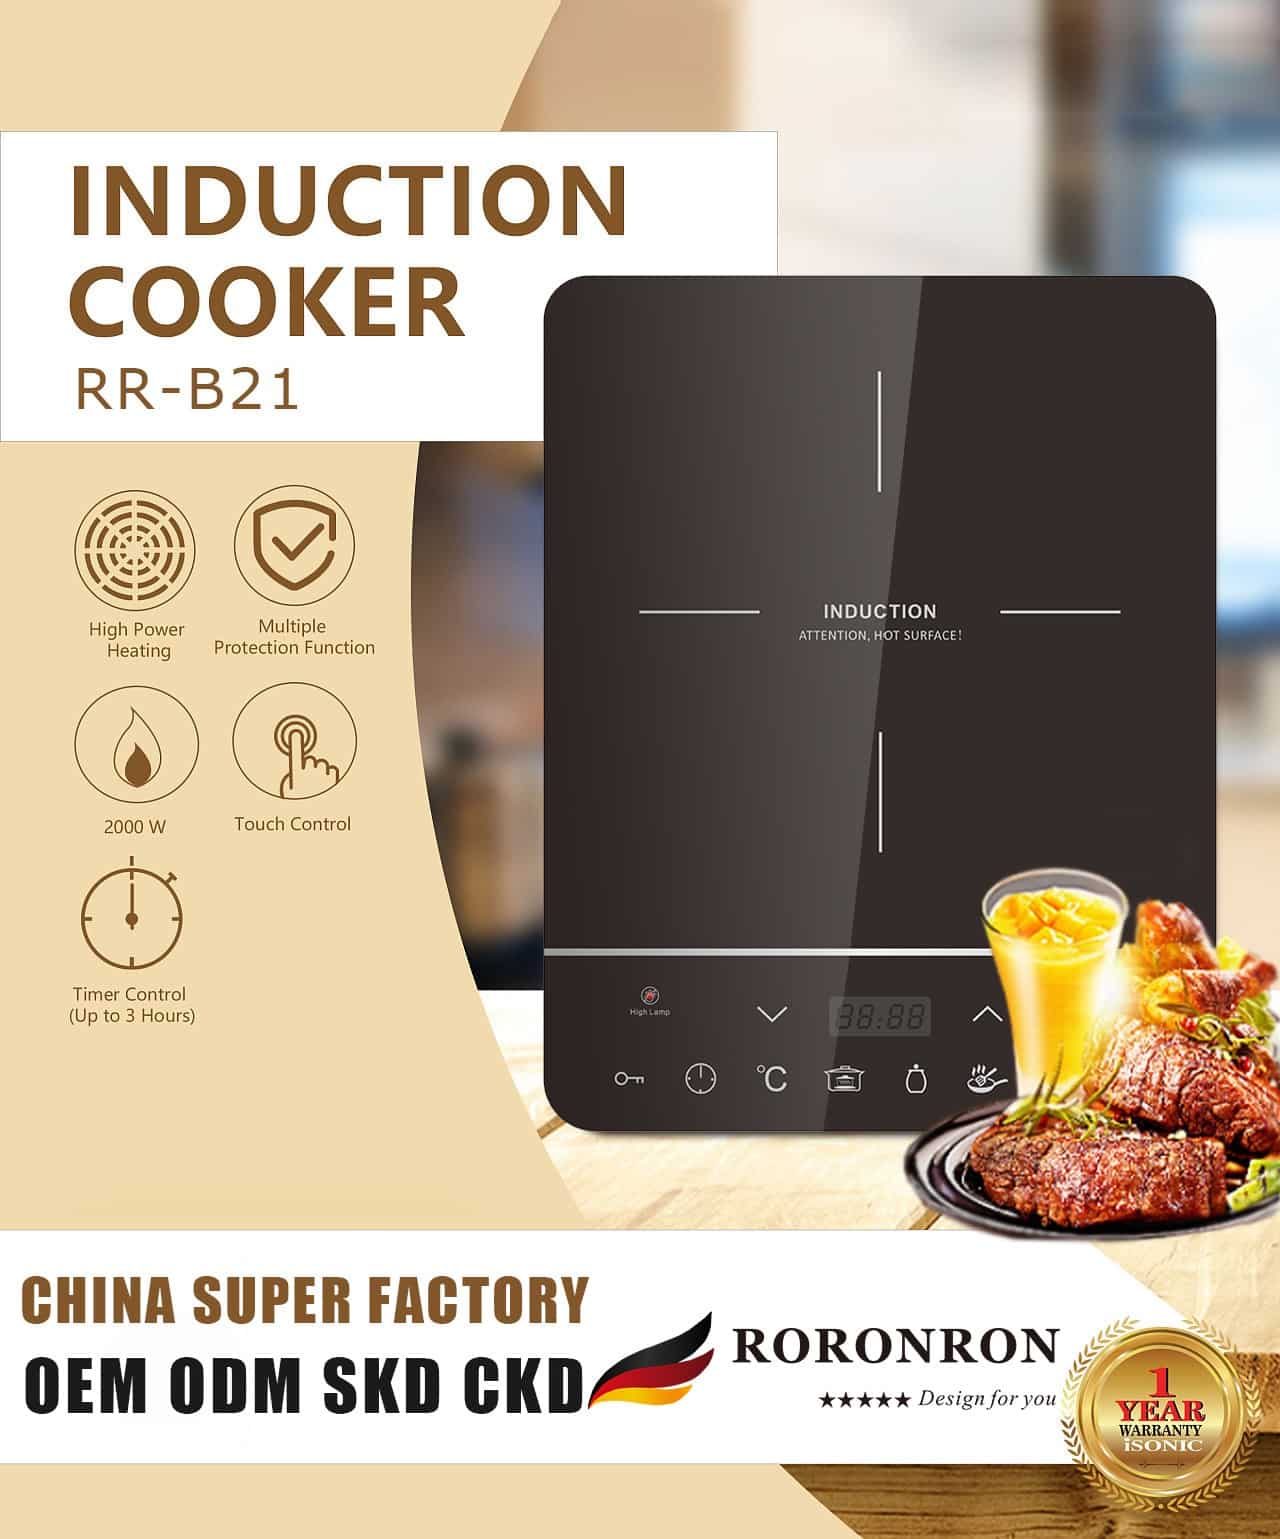 Induction cooker 7